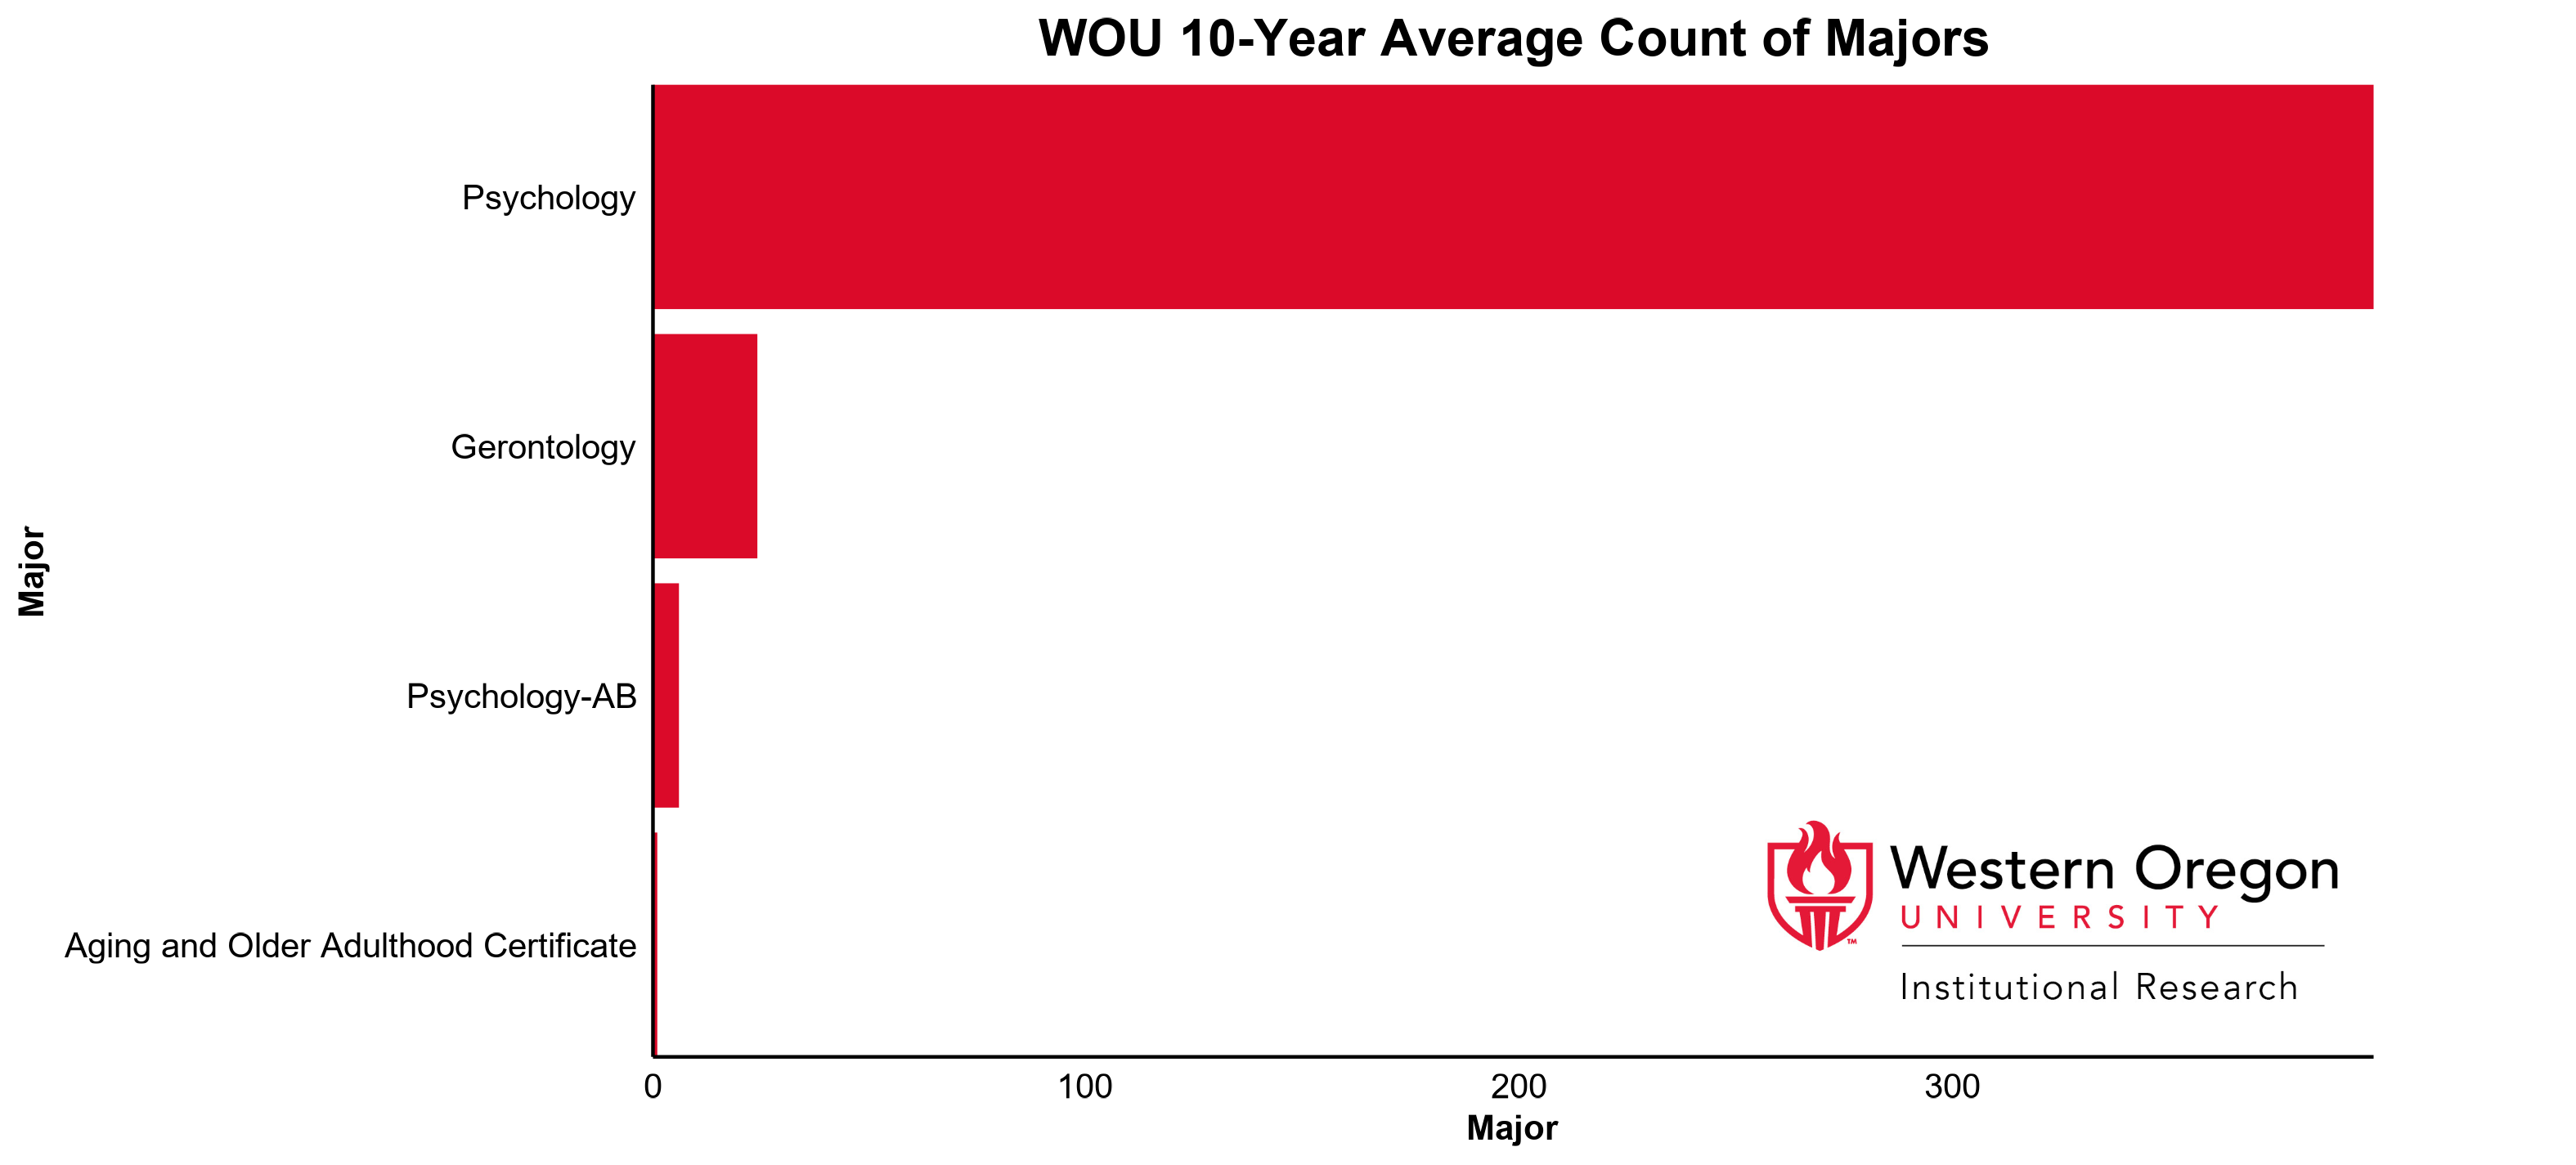 Bar graph of the 10-year average count of majors at WOU for the Behavioral Sciences division